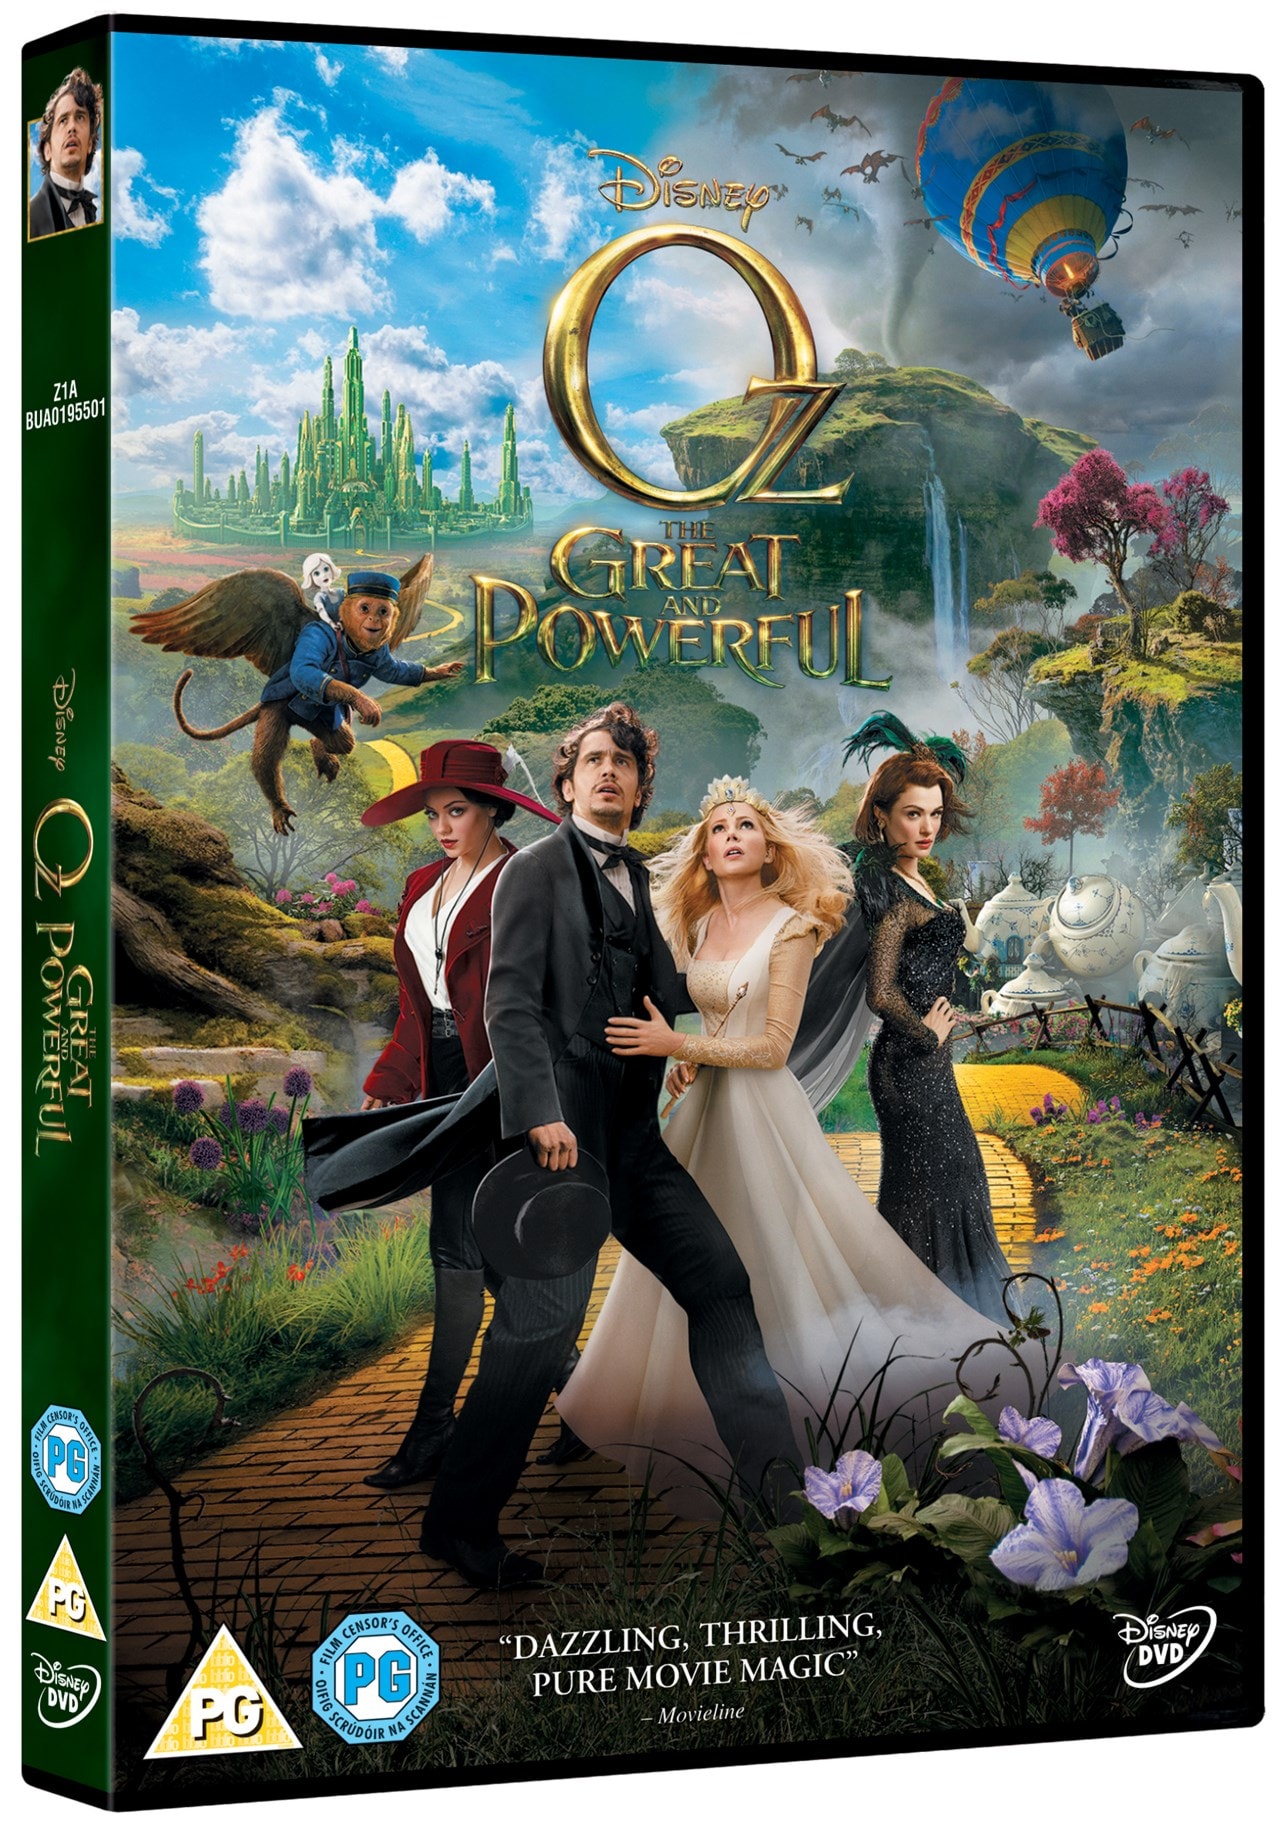 Oz The Great and Powerful DVD Free shipping over £20 HMV Store